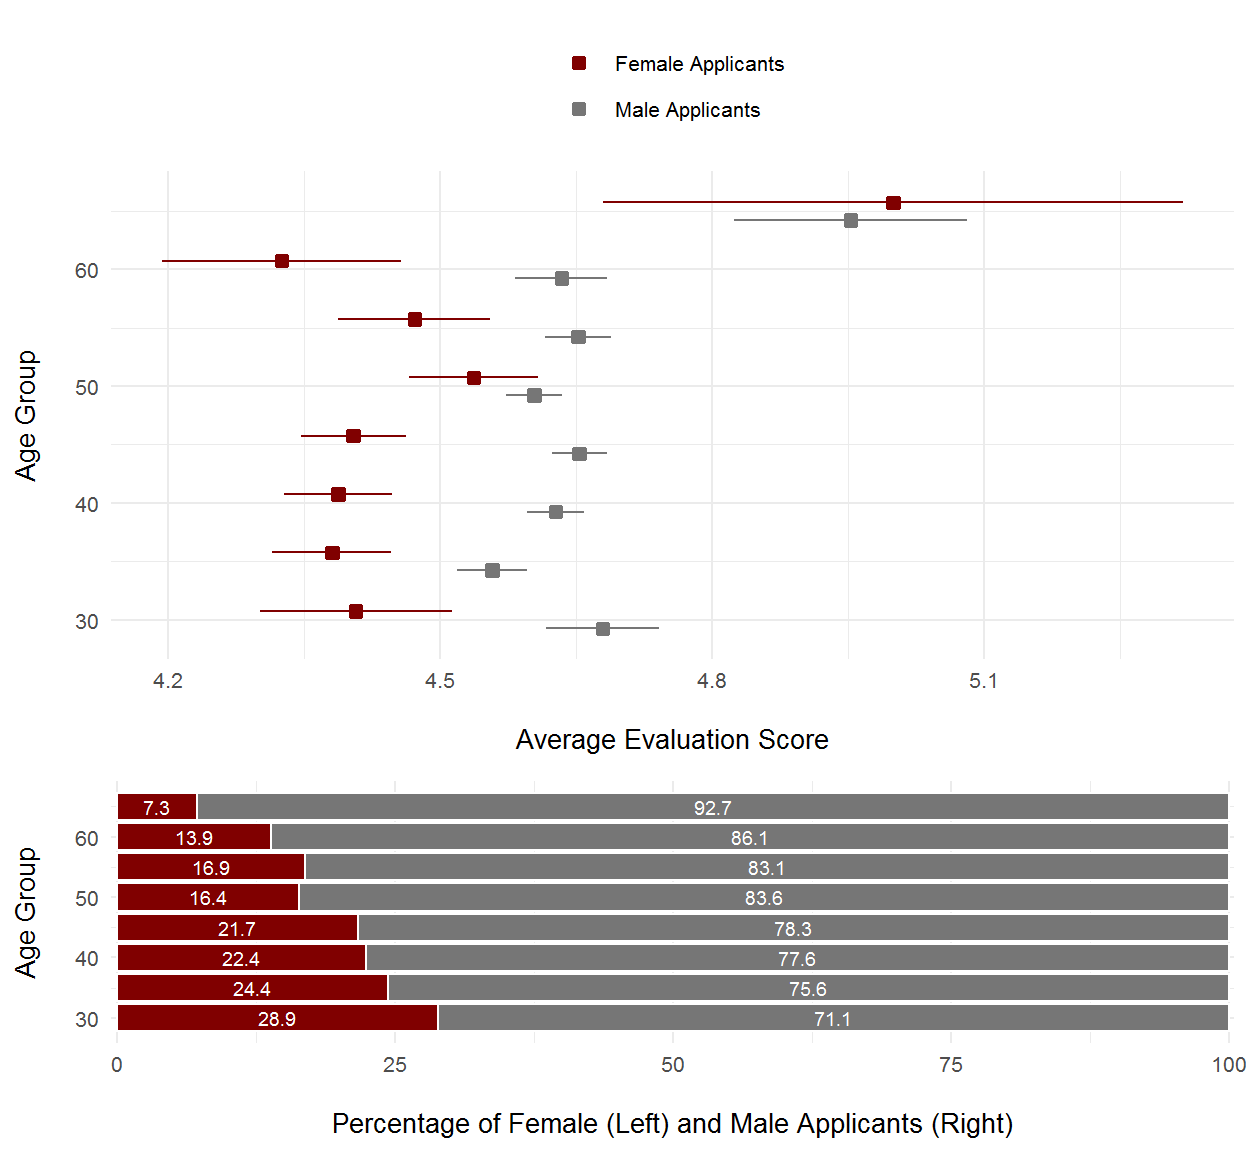 Upper panels: mean review scores by age group for both female (top) and male (bottom) applicants. Horizontal lines indicate the Wald confidence interval of the mean. Lower panel: Proportions of female and male applicants per age group. This figure does not include the age groups with very low counts to facilitate the interpretation.